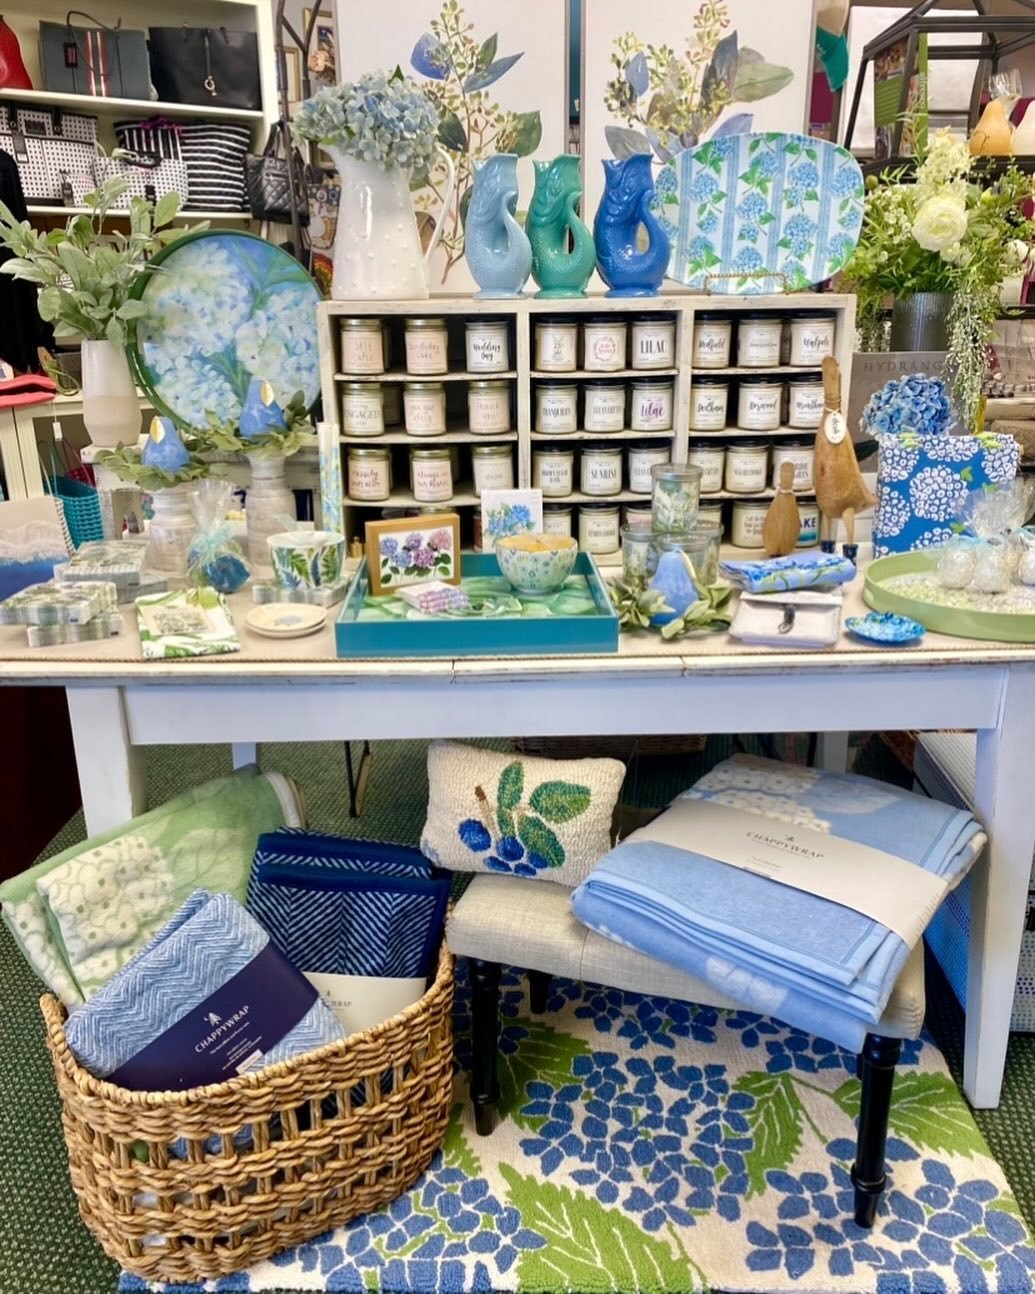 Give us a nice day and we turn the place into summer vibes! 
#decorandmorewestwood #shoplocalma #springdecor #homedecor #gift #giftsideas #hostessgift #hydrangea #homeaccessories